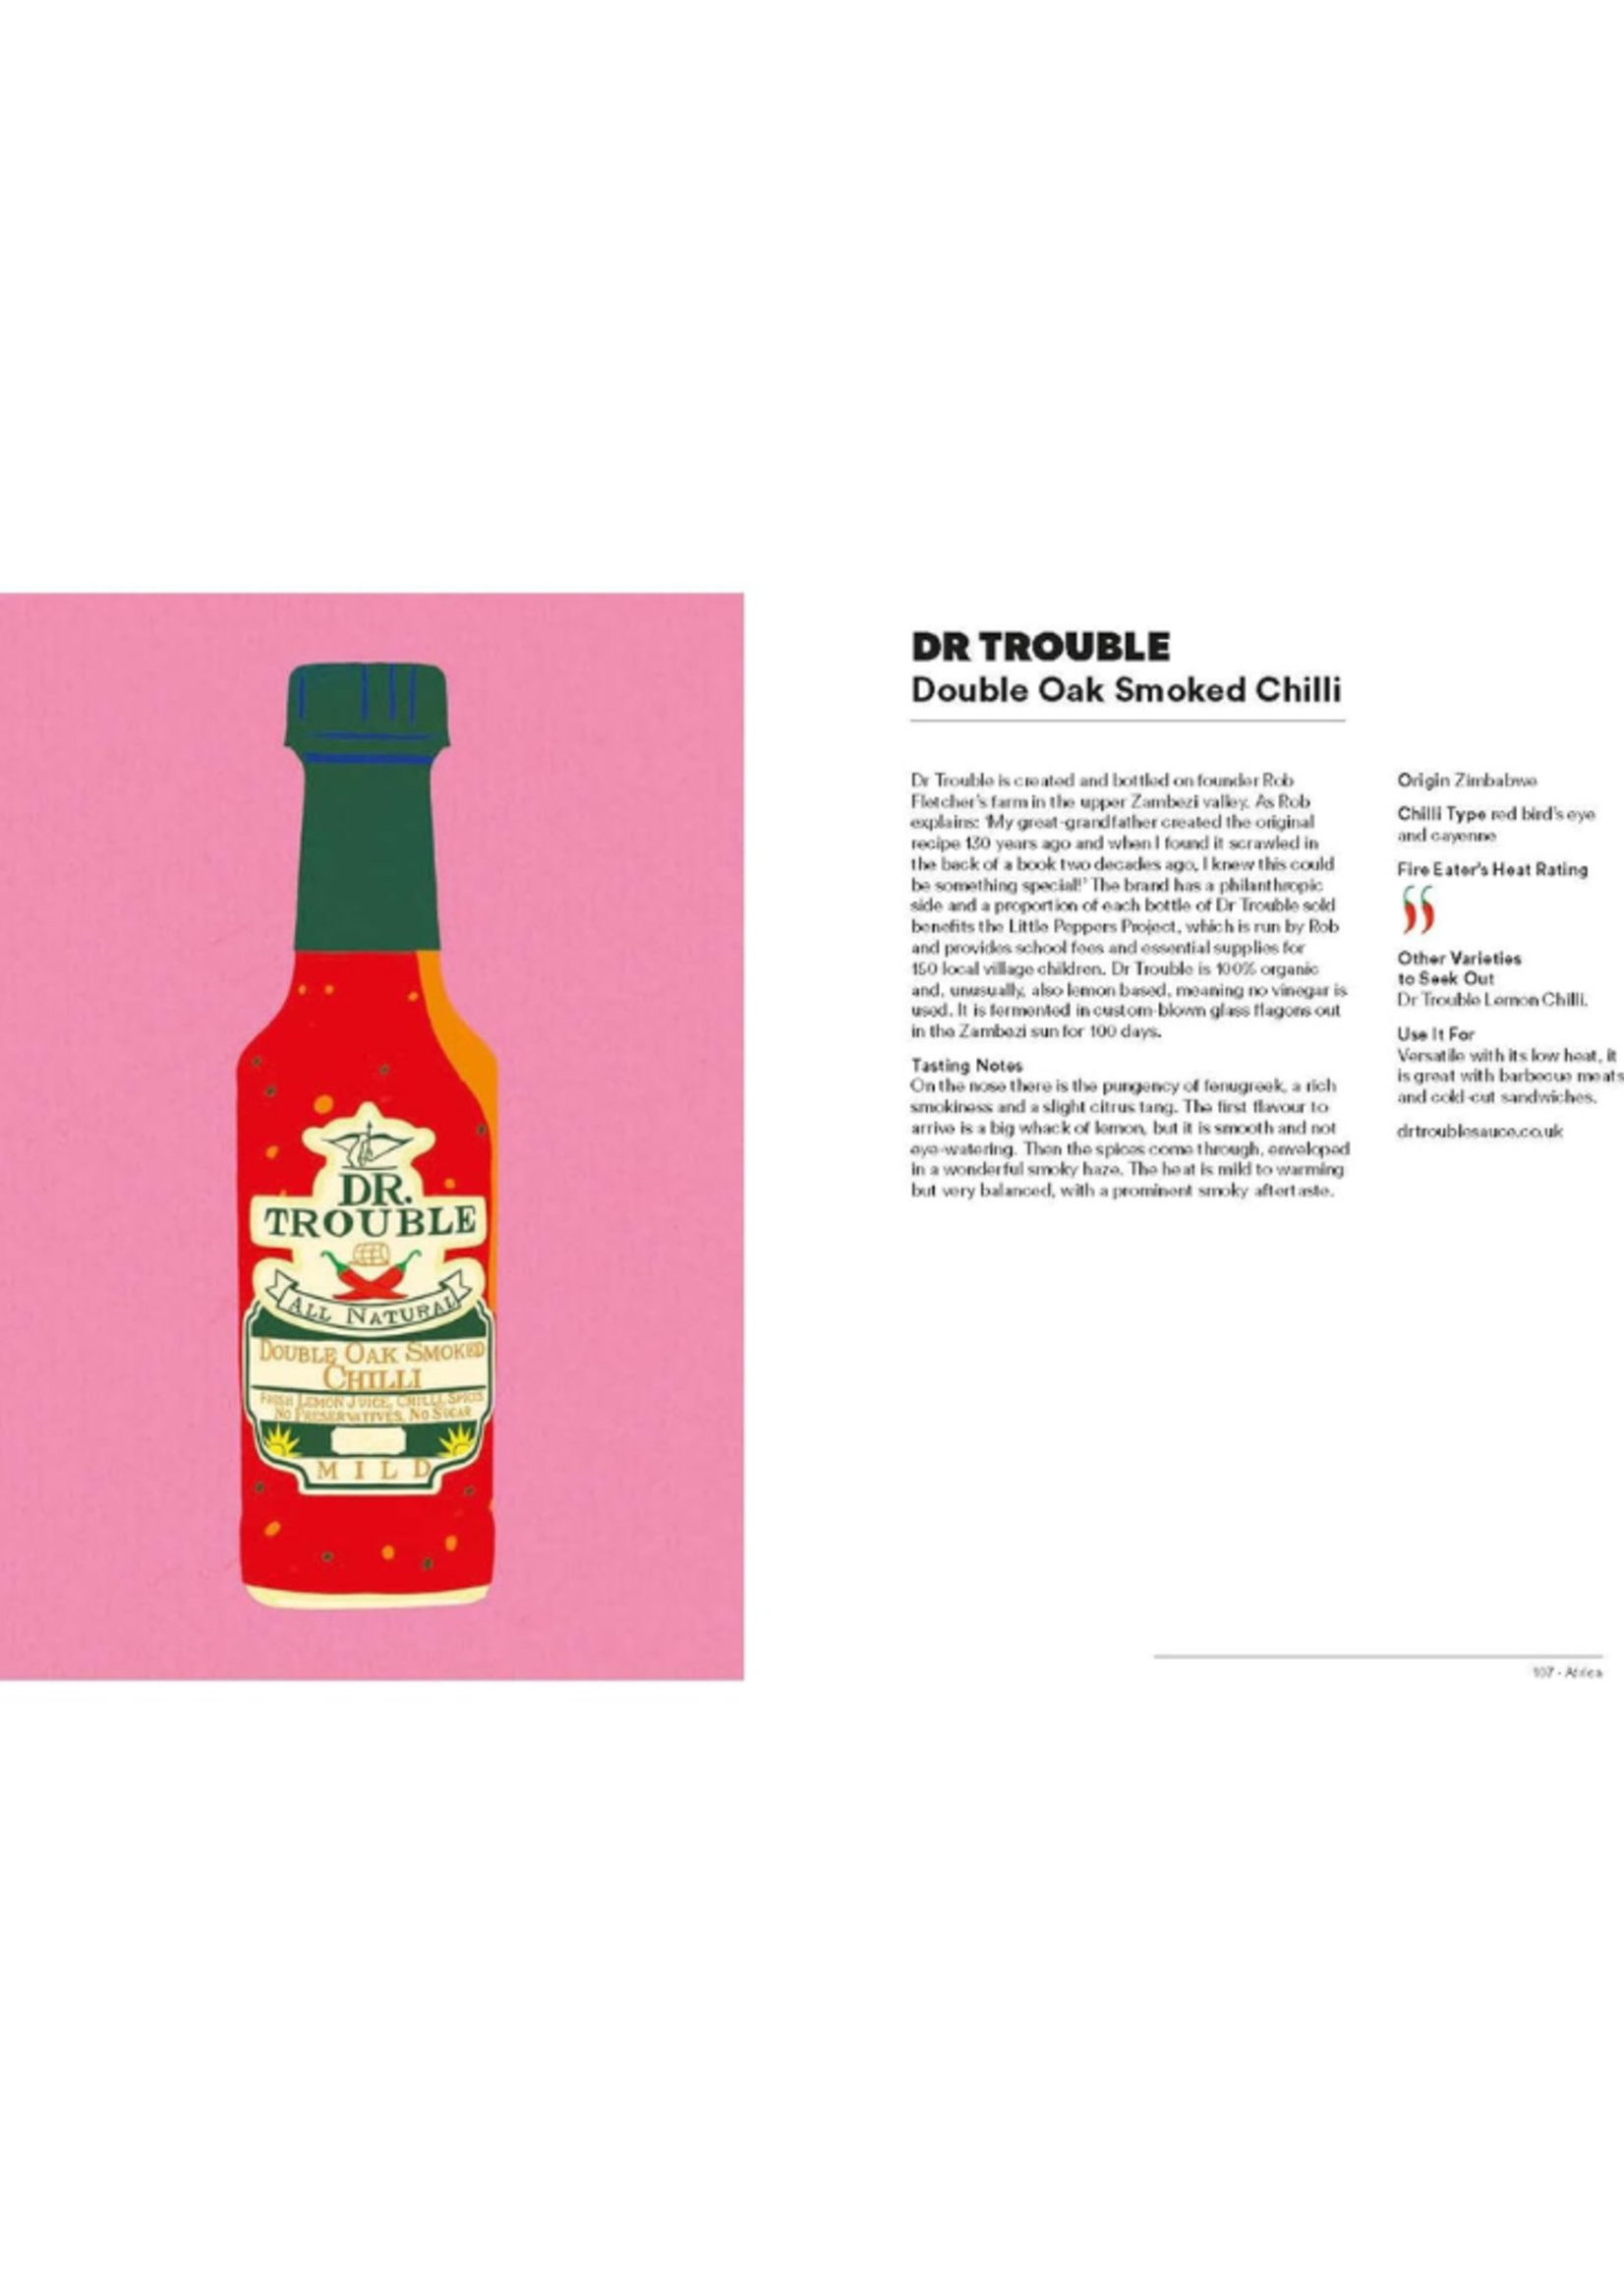 Hot Sauces of the World (Complete Guide to Types)